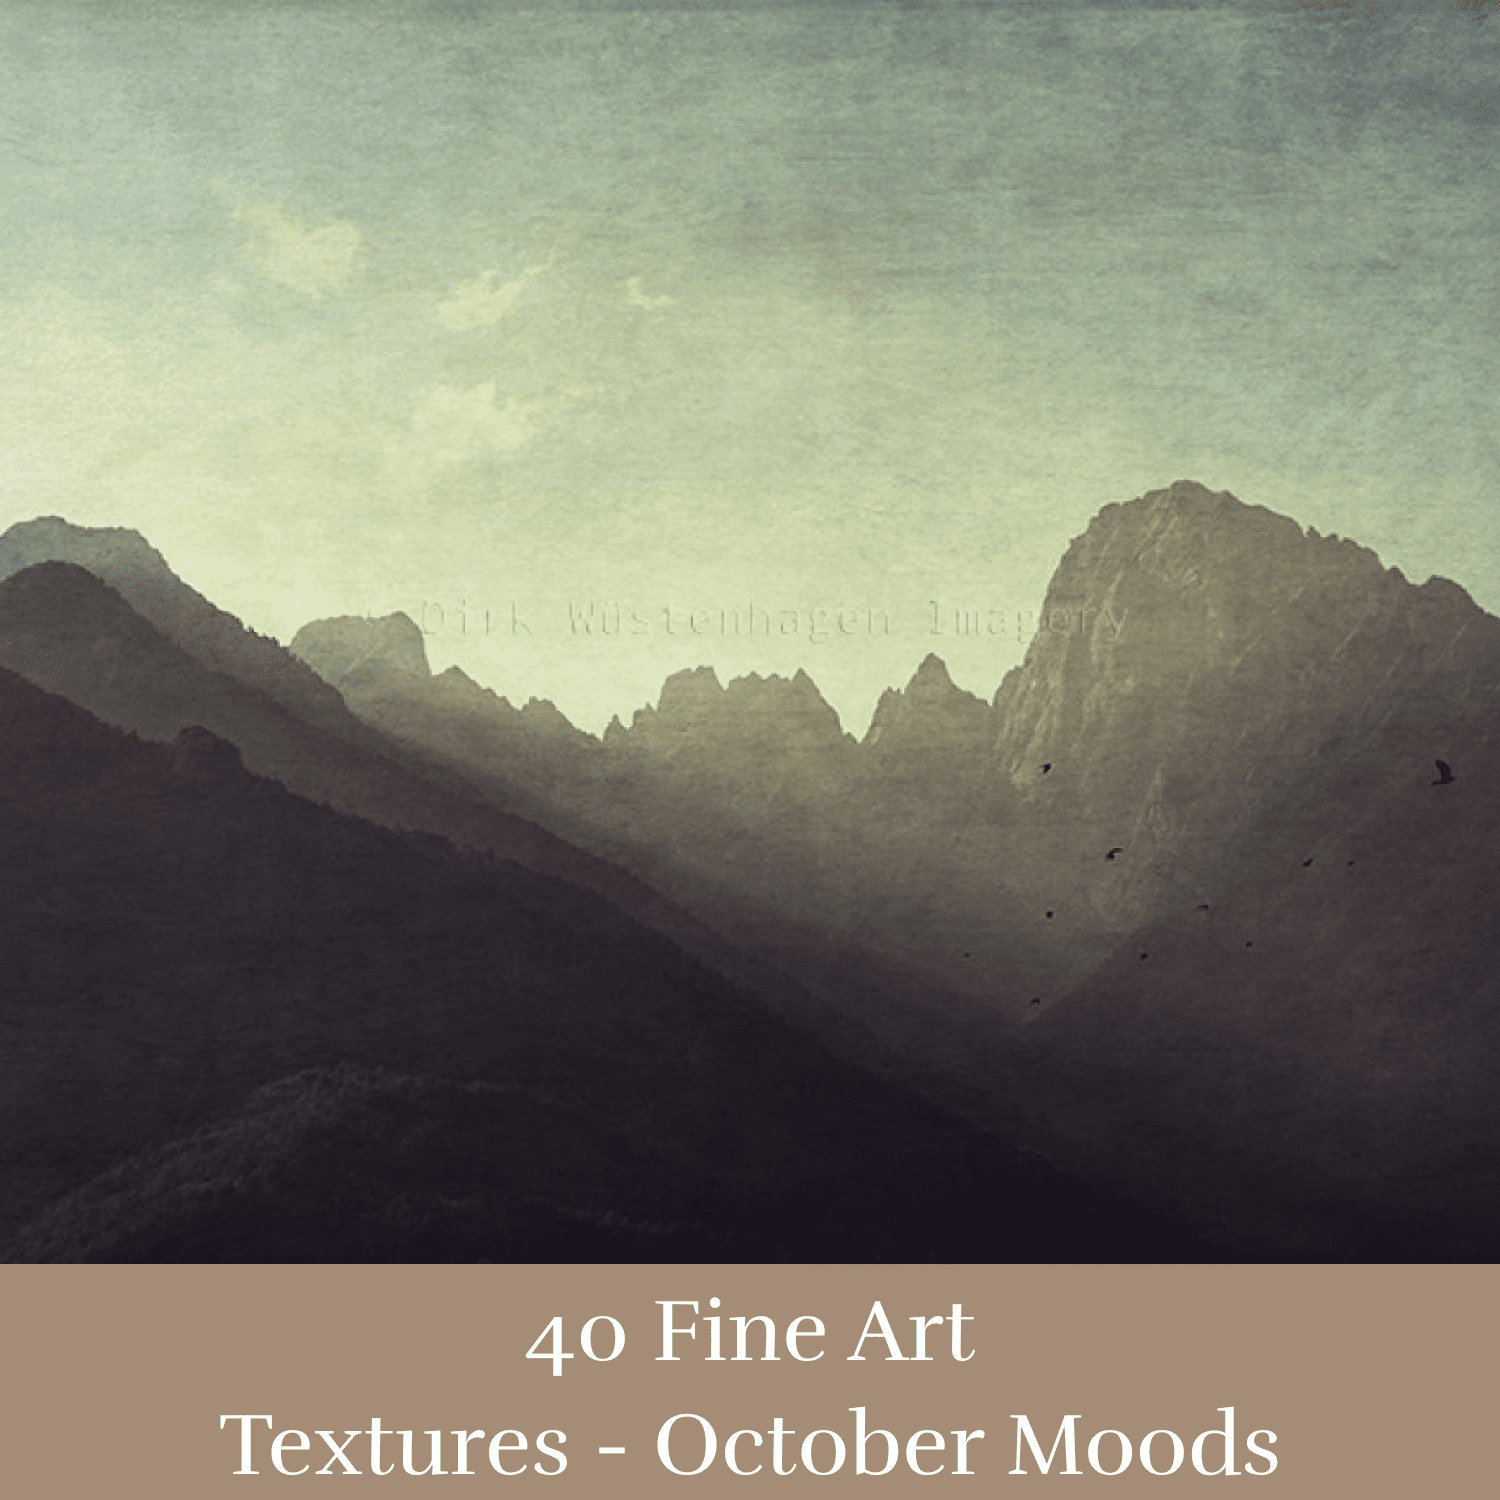 40 Fine Art Textures - October Moods - Image of Mountains.